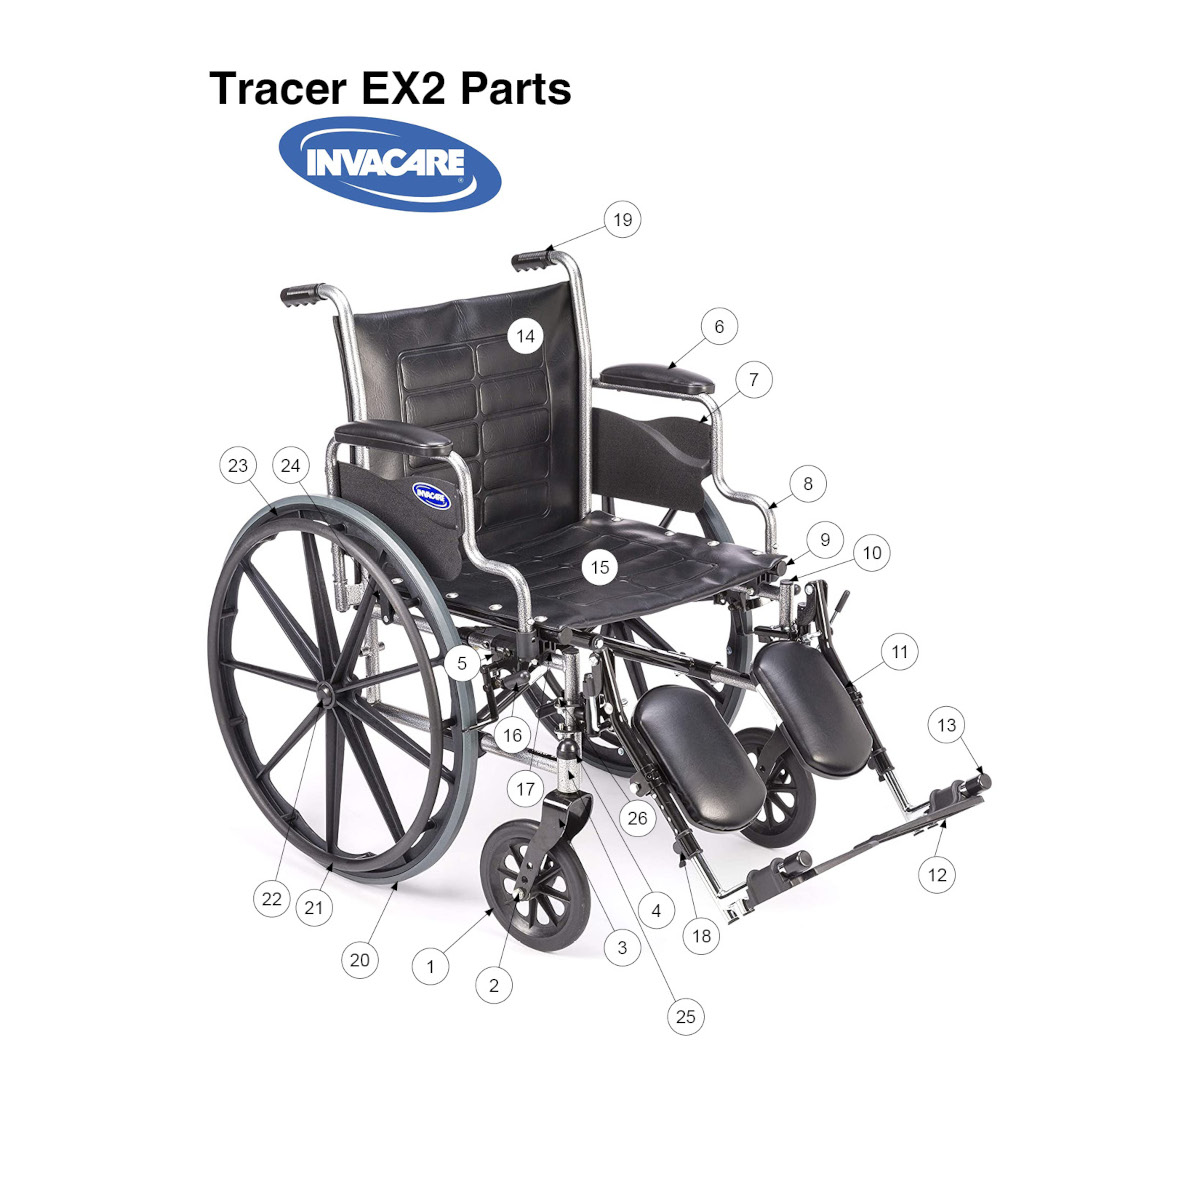 Tracer EX2 Parts List